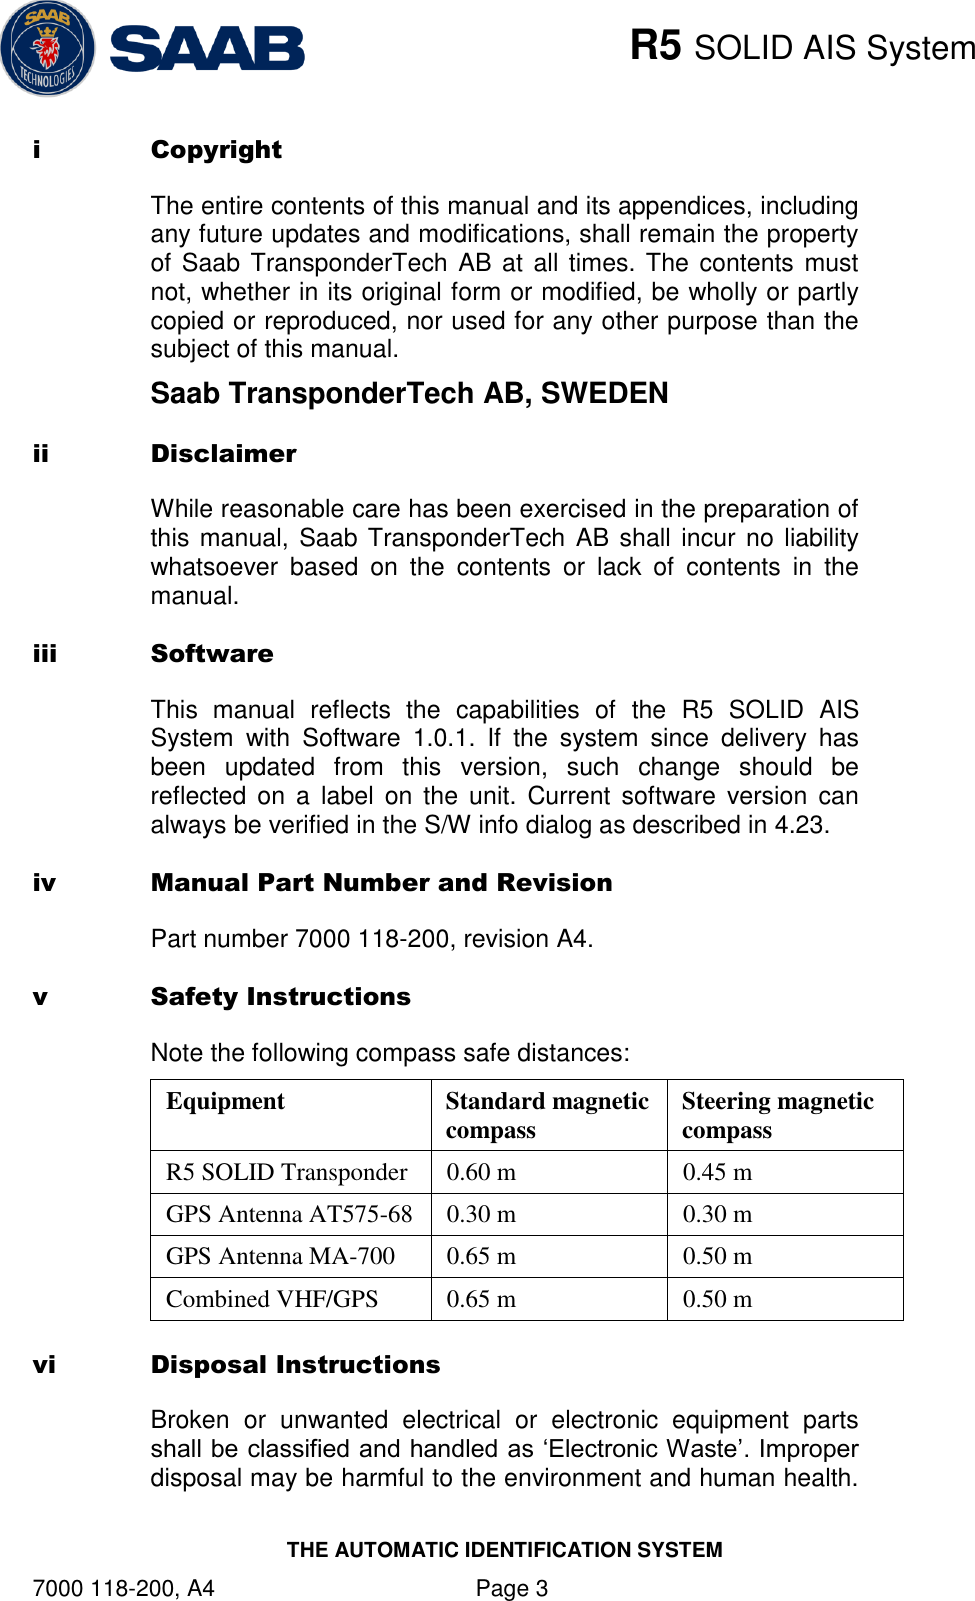    R5 SOLID AIS System THE AUTOMATIC IDENTIFICATION SYSTEM 7000 118-200, A4    Page 3 i Copyright The entire contents of this manual and its appendices, including any future updates and modifications, shall remain the property of Saab TransponderTech AB at all times. The  contents must not, whether in its original form or modified, be wholly or partly copied or reproduced, nor used for any other purpose than the subject of this manual. Saab TransponderTech AB, SWEDEN ii Disclaimer While reasonable care has been exercised in the preparation of this manual, Saab TransponderTech AB shall incur no liability whatsoever  based  on  the  contents  or  lack  of  contents  in  the manual. iii Software This  manual  reflects  the  capabilities  of  the  R5  SOLID  AIS System  with  Software  1.0.1.  If  the  system  since  delivery  has been  updated  from  this  version,  such  change  should  be reflected  on a  label  on  the  unit.  Current  software  version  can always be verified in the S/W info dialog as described in 4.23. iv Manual Part Number and Revision Part number 7000 118-200, revision A4. v Safety Instructions Note the following compass safe distances: Equipment Standard magnetic compass  Steering magnetic compass R5 SOLID Transponder  0.60 m  0.45 m GPS Antenna AT575-68 0.30 m  0.30 m  GPS Antenna MA-700 0.65 m 0.50 m Combined VHF/GPS 0.65 m  0.50 m vi Disposal Instructions  Broken  or  unwanted  electrical  or  electronic  equipment  parts shall be classified and handled as „Electronic Waste‟. Improper disposal may be harmful to the environment and human health. 